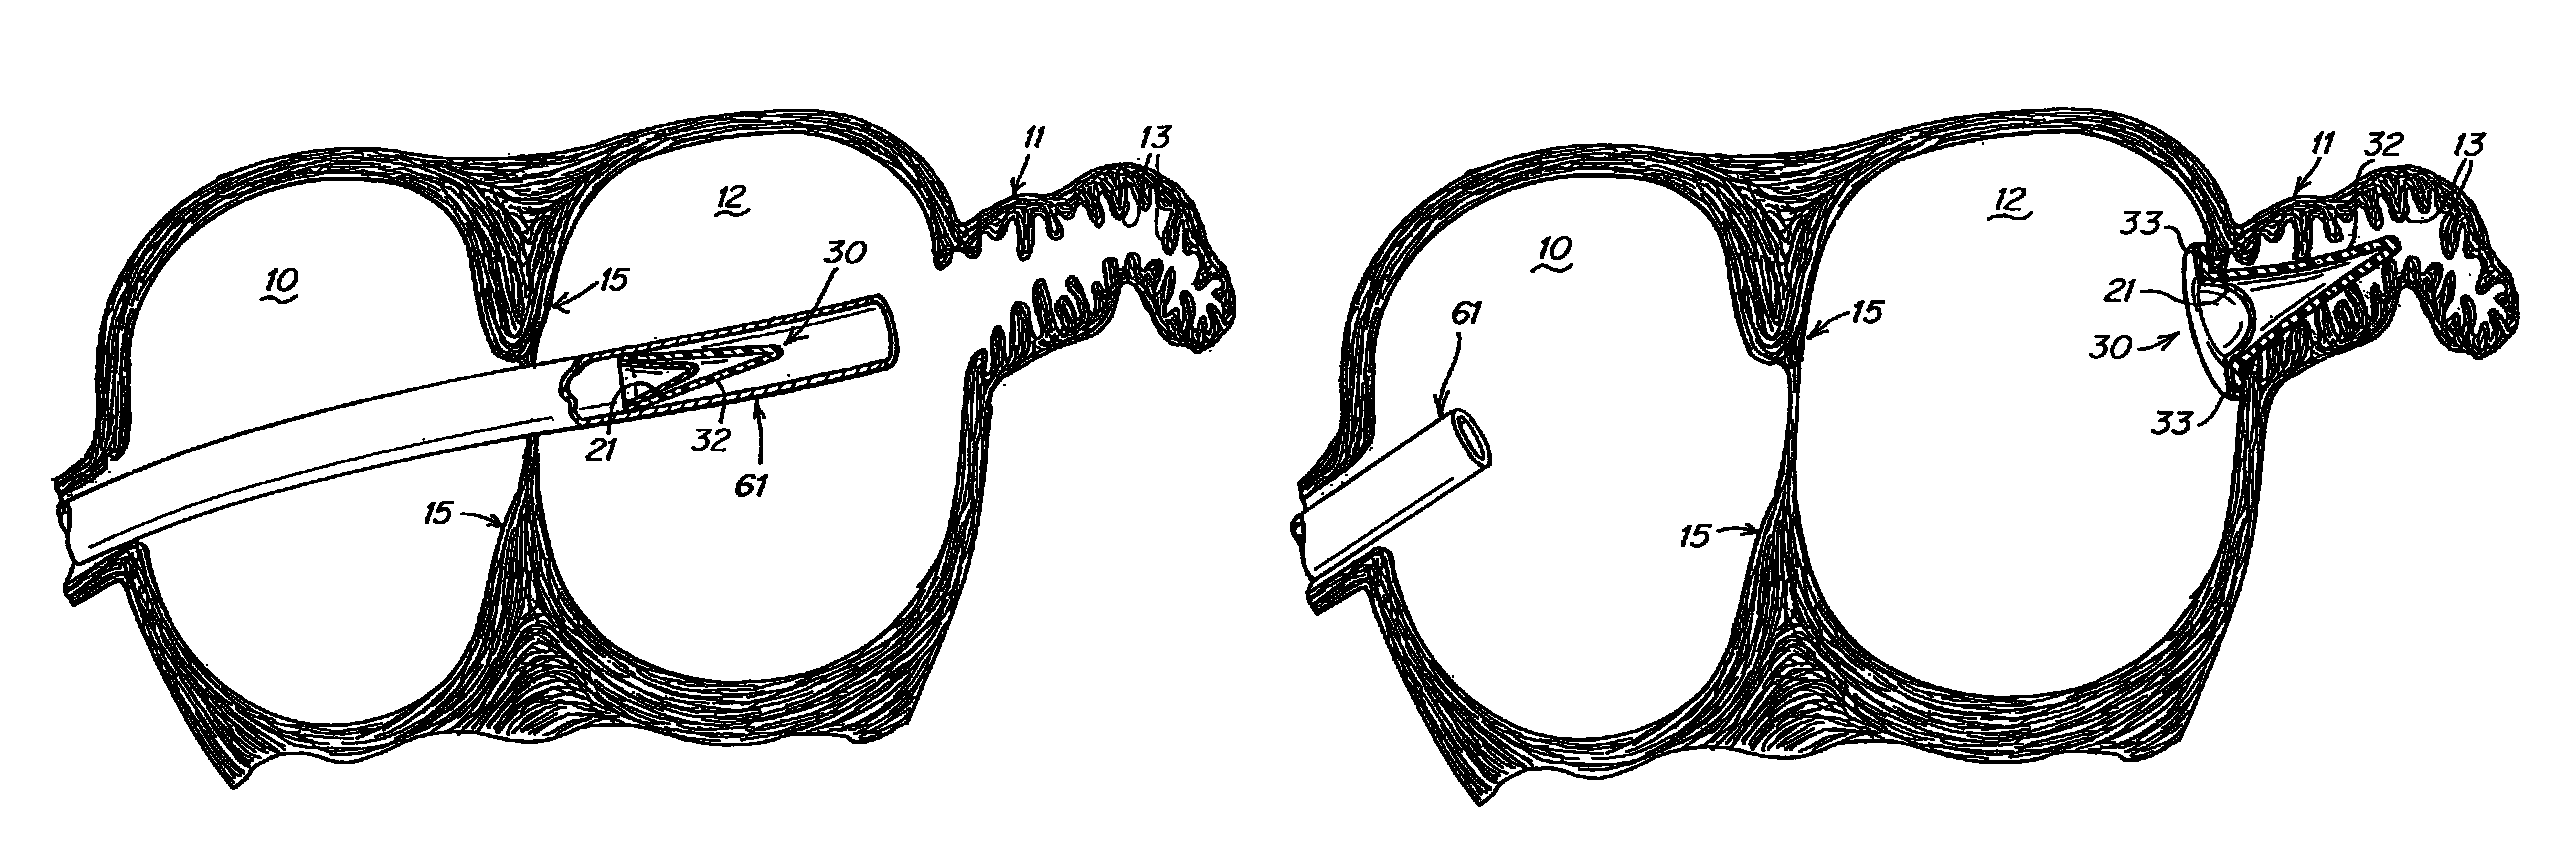 Device and methods for preventing formation of thrombi in the left atrial appendage